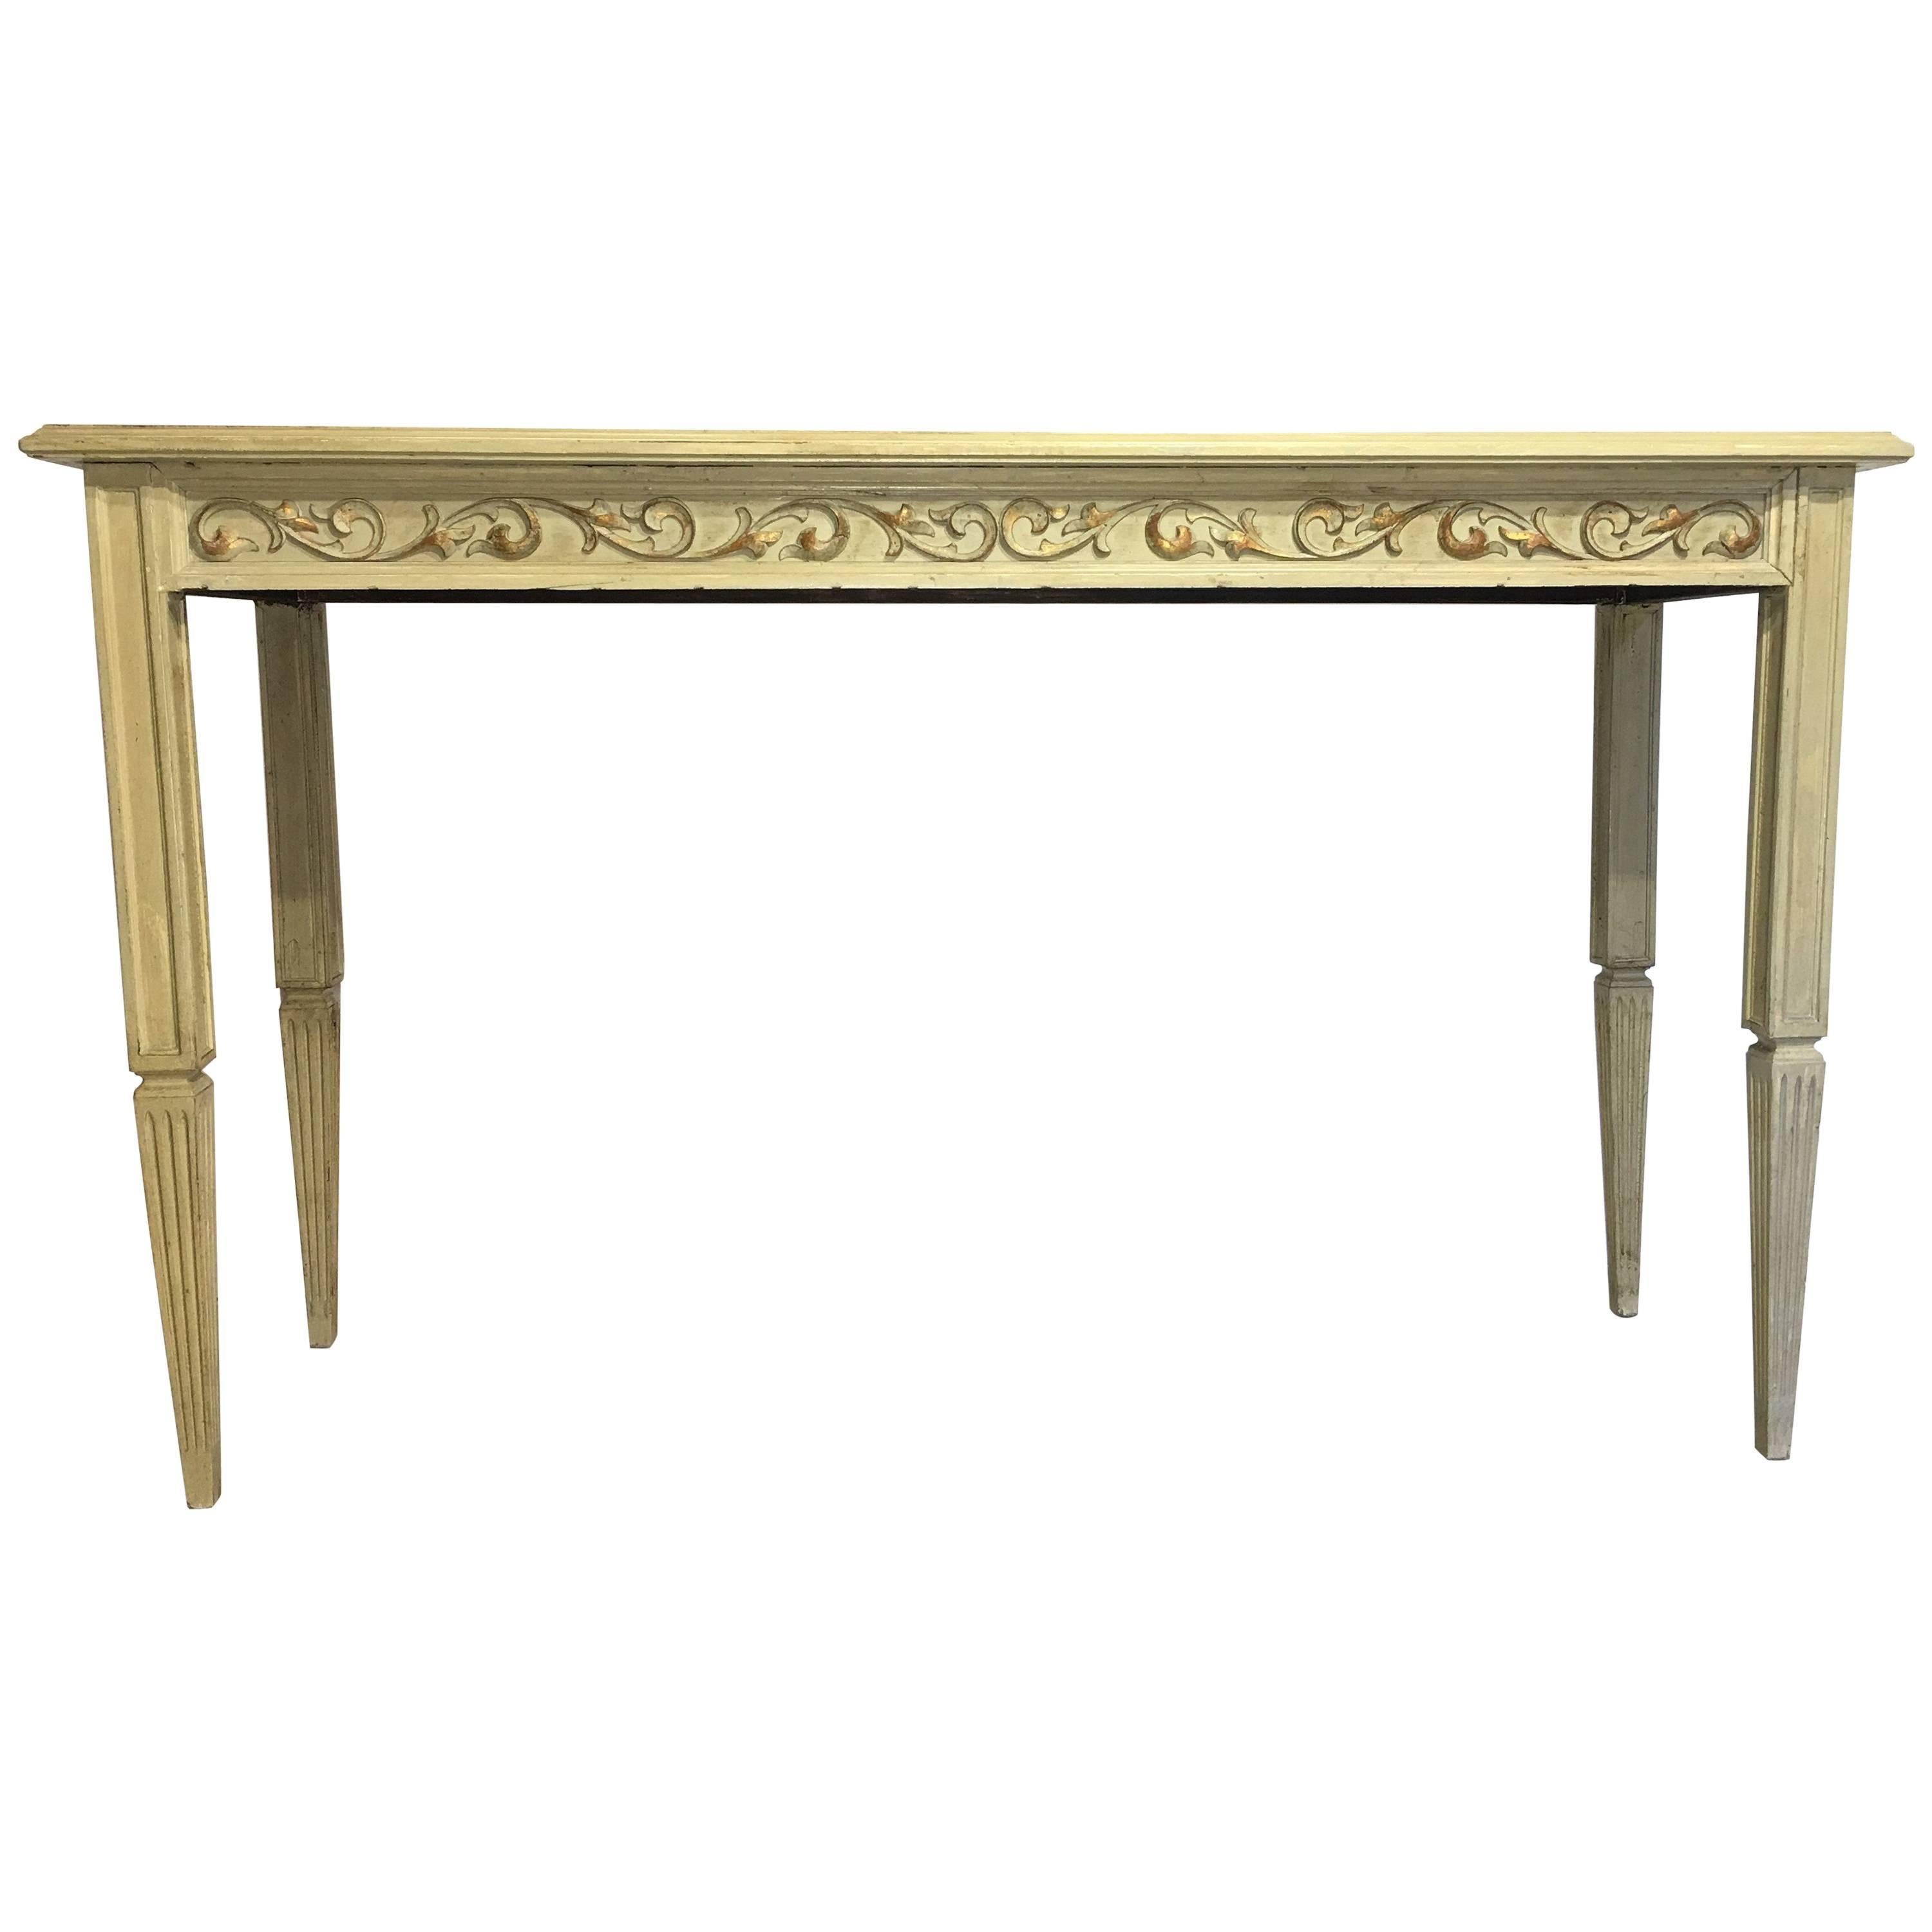 20th Century Painted Cream Beige Console Table with Ornamental Carved Relief